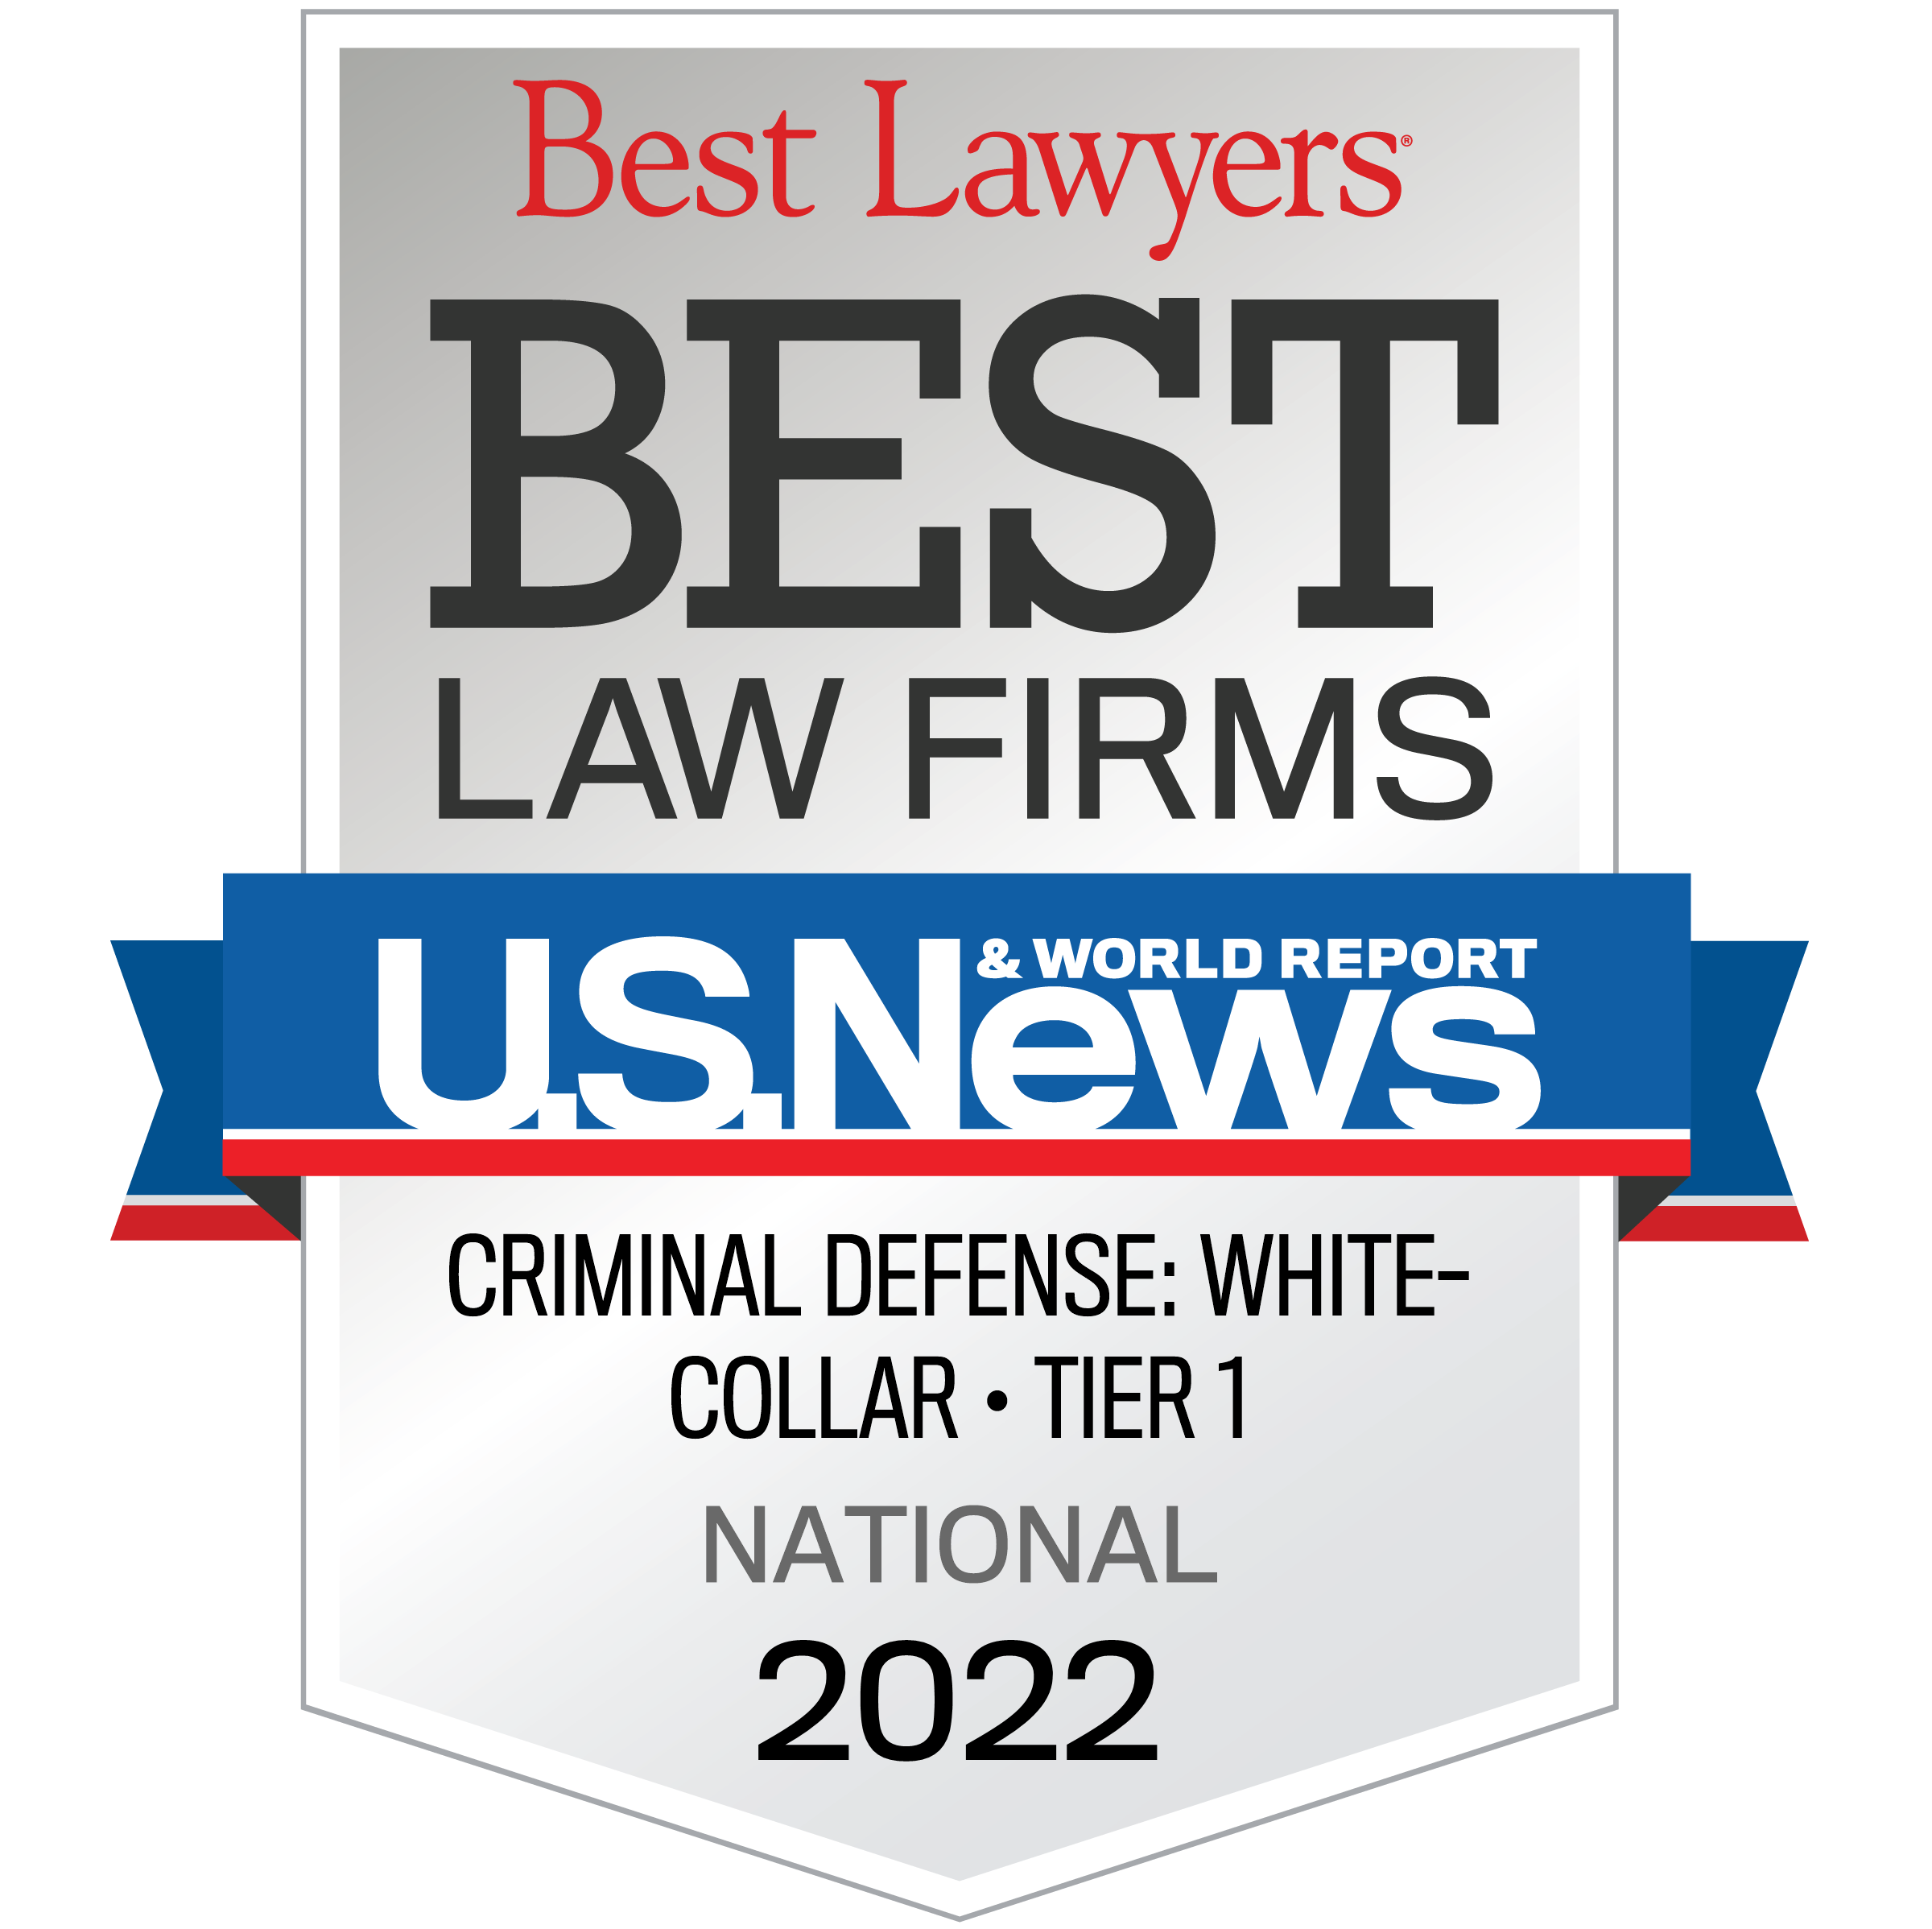 2022 Best Lawyers Best Law Firms White Collar - Tier 1 National Ranking